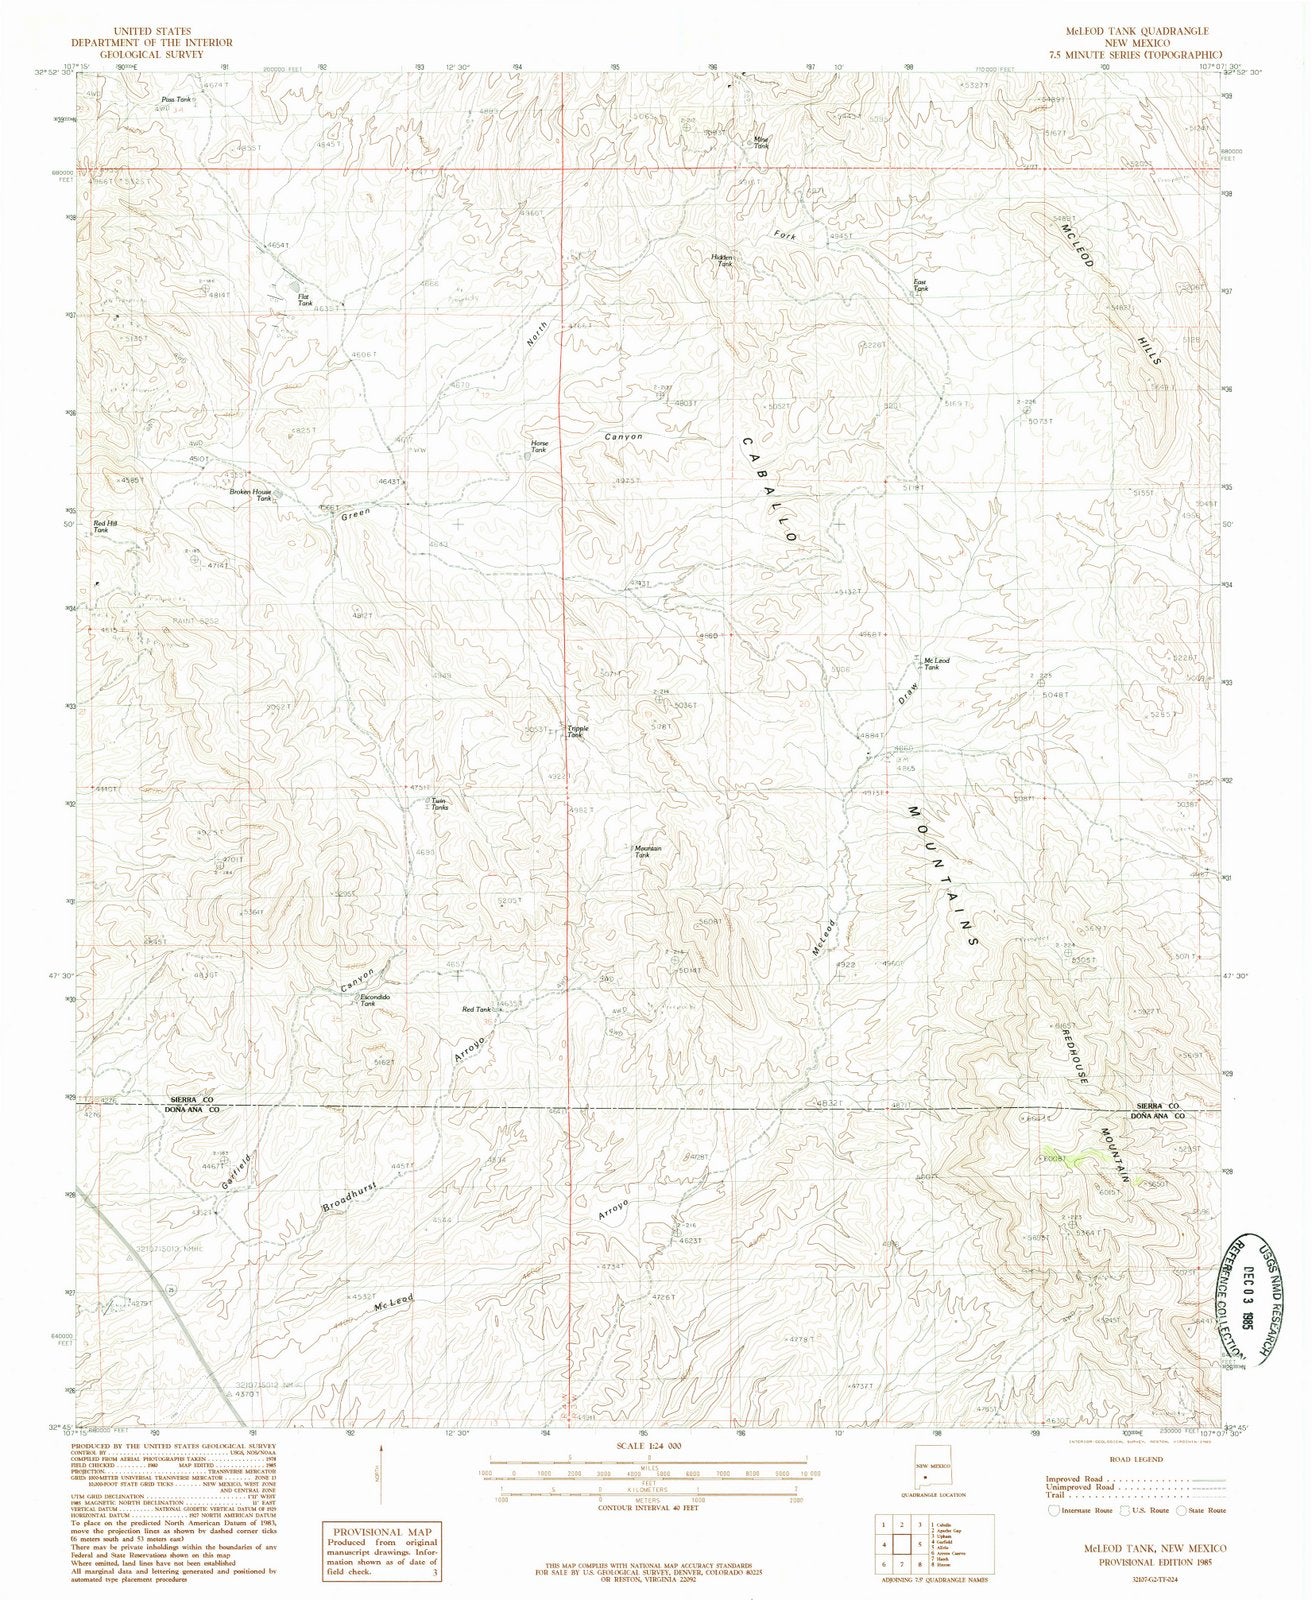 1985 McLeod Tank, NM - New Mexico - USGS Topographic Map